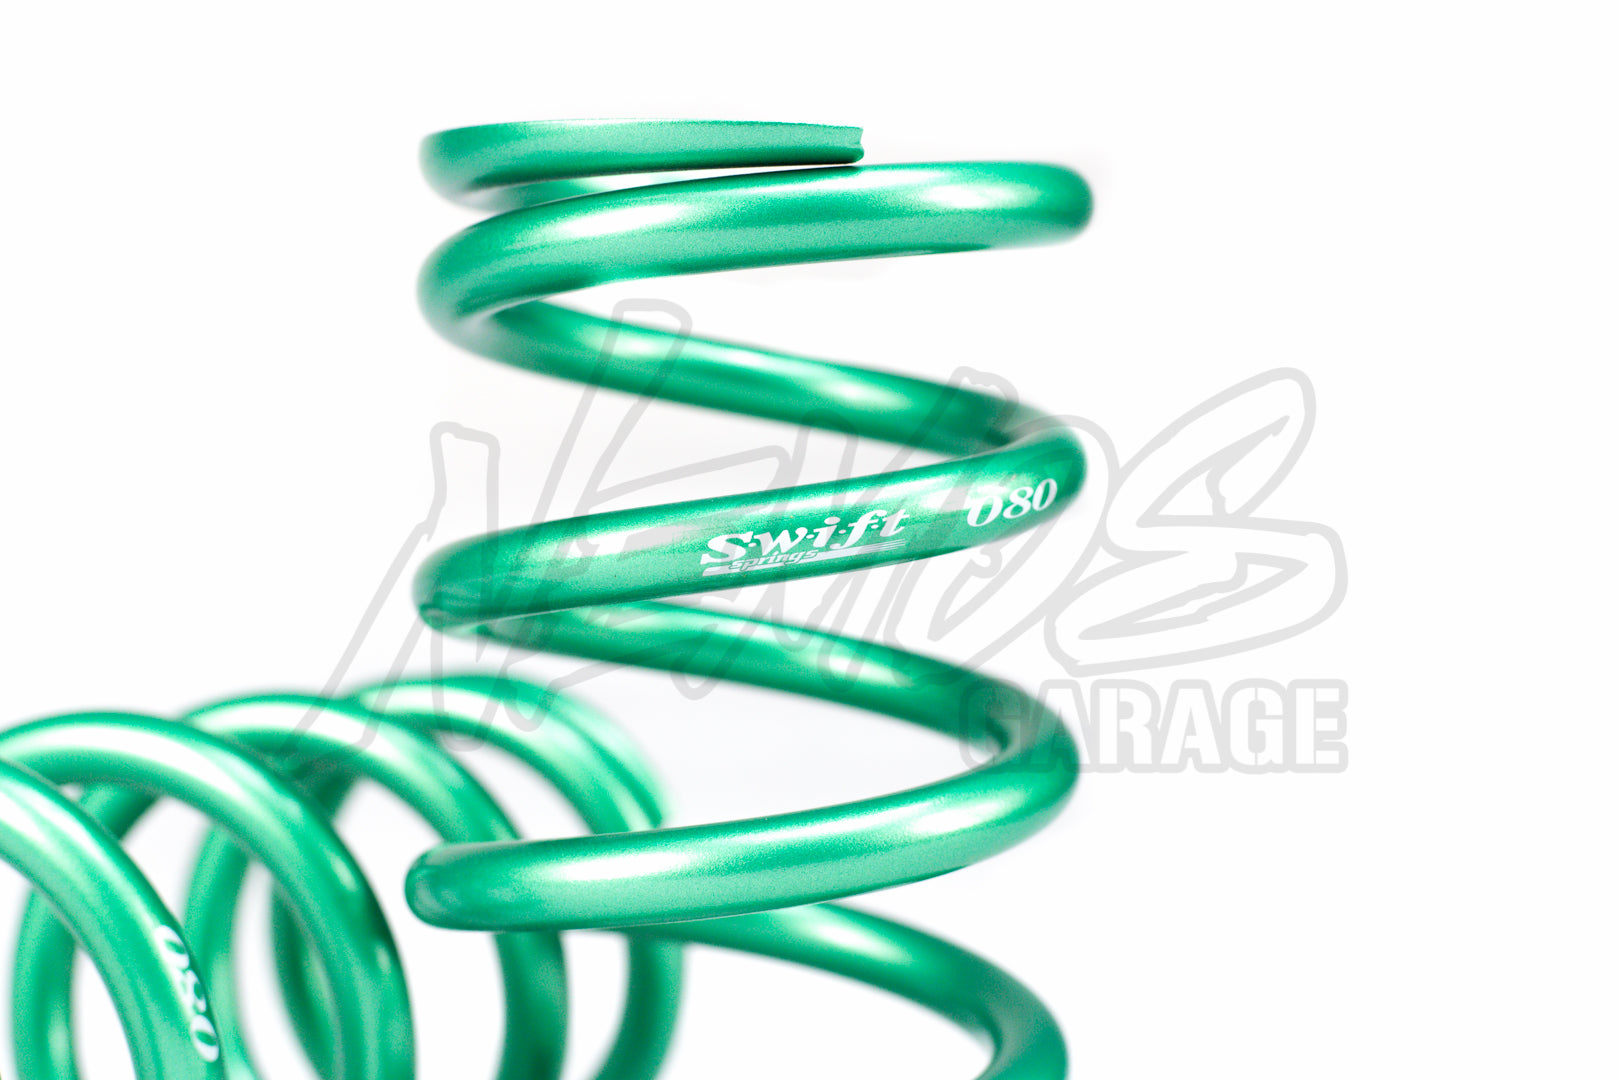 Swift Metric Coilover Springs ID 70MM (2.76") - 8" Length - Honda/Acura Applications